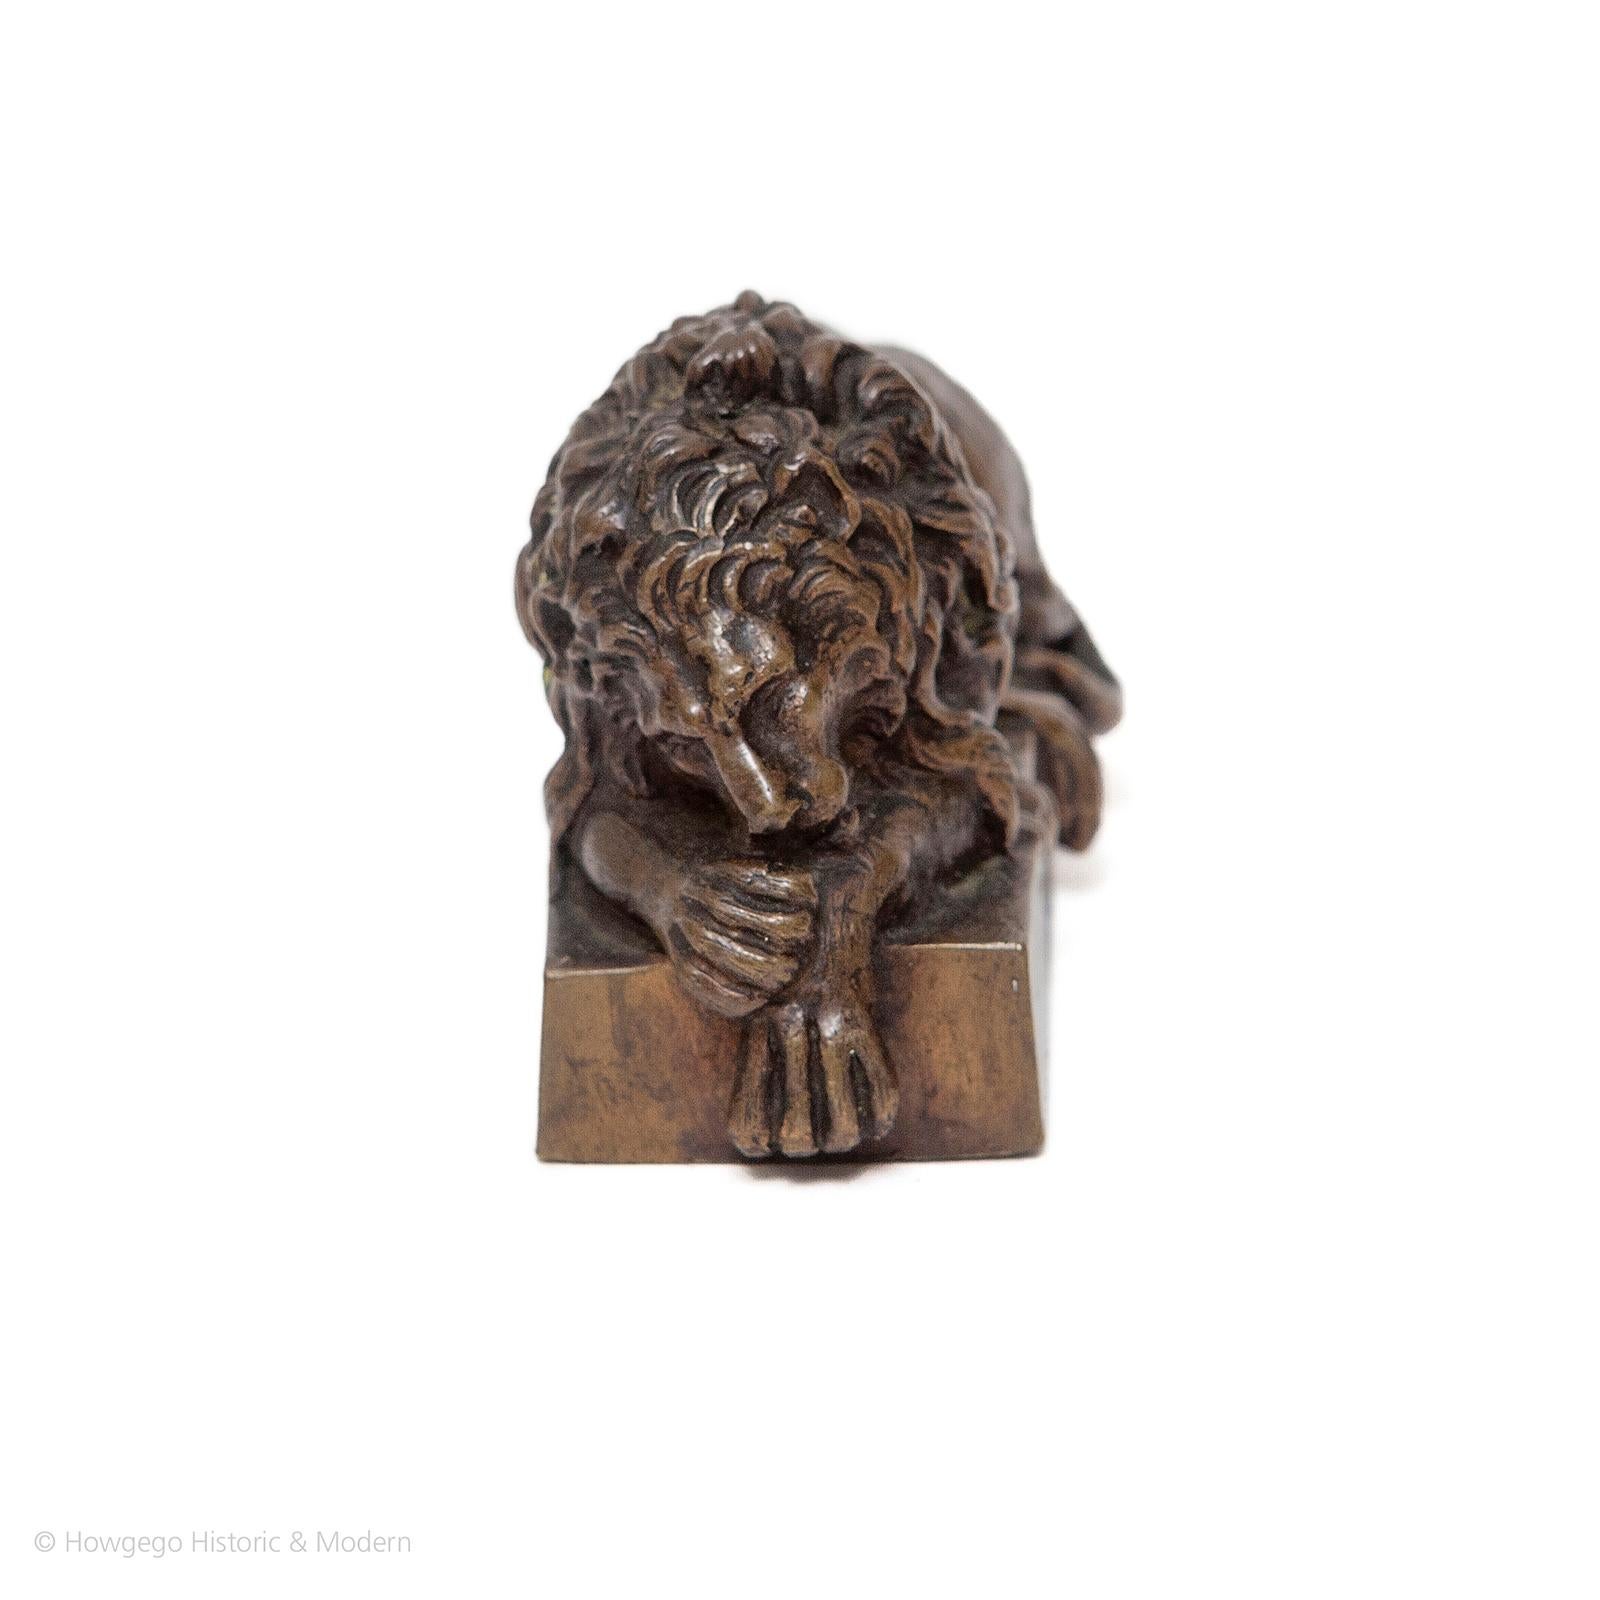 - Beautifully modelled and cast
- Atmospheric reference to the iconic original lions
- Grand Tour collectible

An Italian bronze model of a sleeping lion, early-19th century. Modelled after Antonio Canova. On rectangular bronze base. 

The